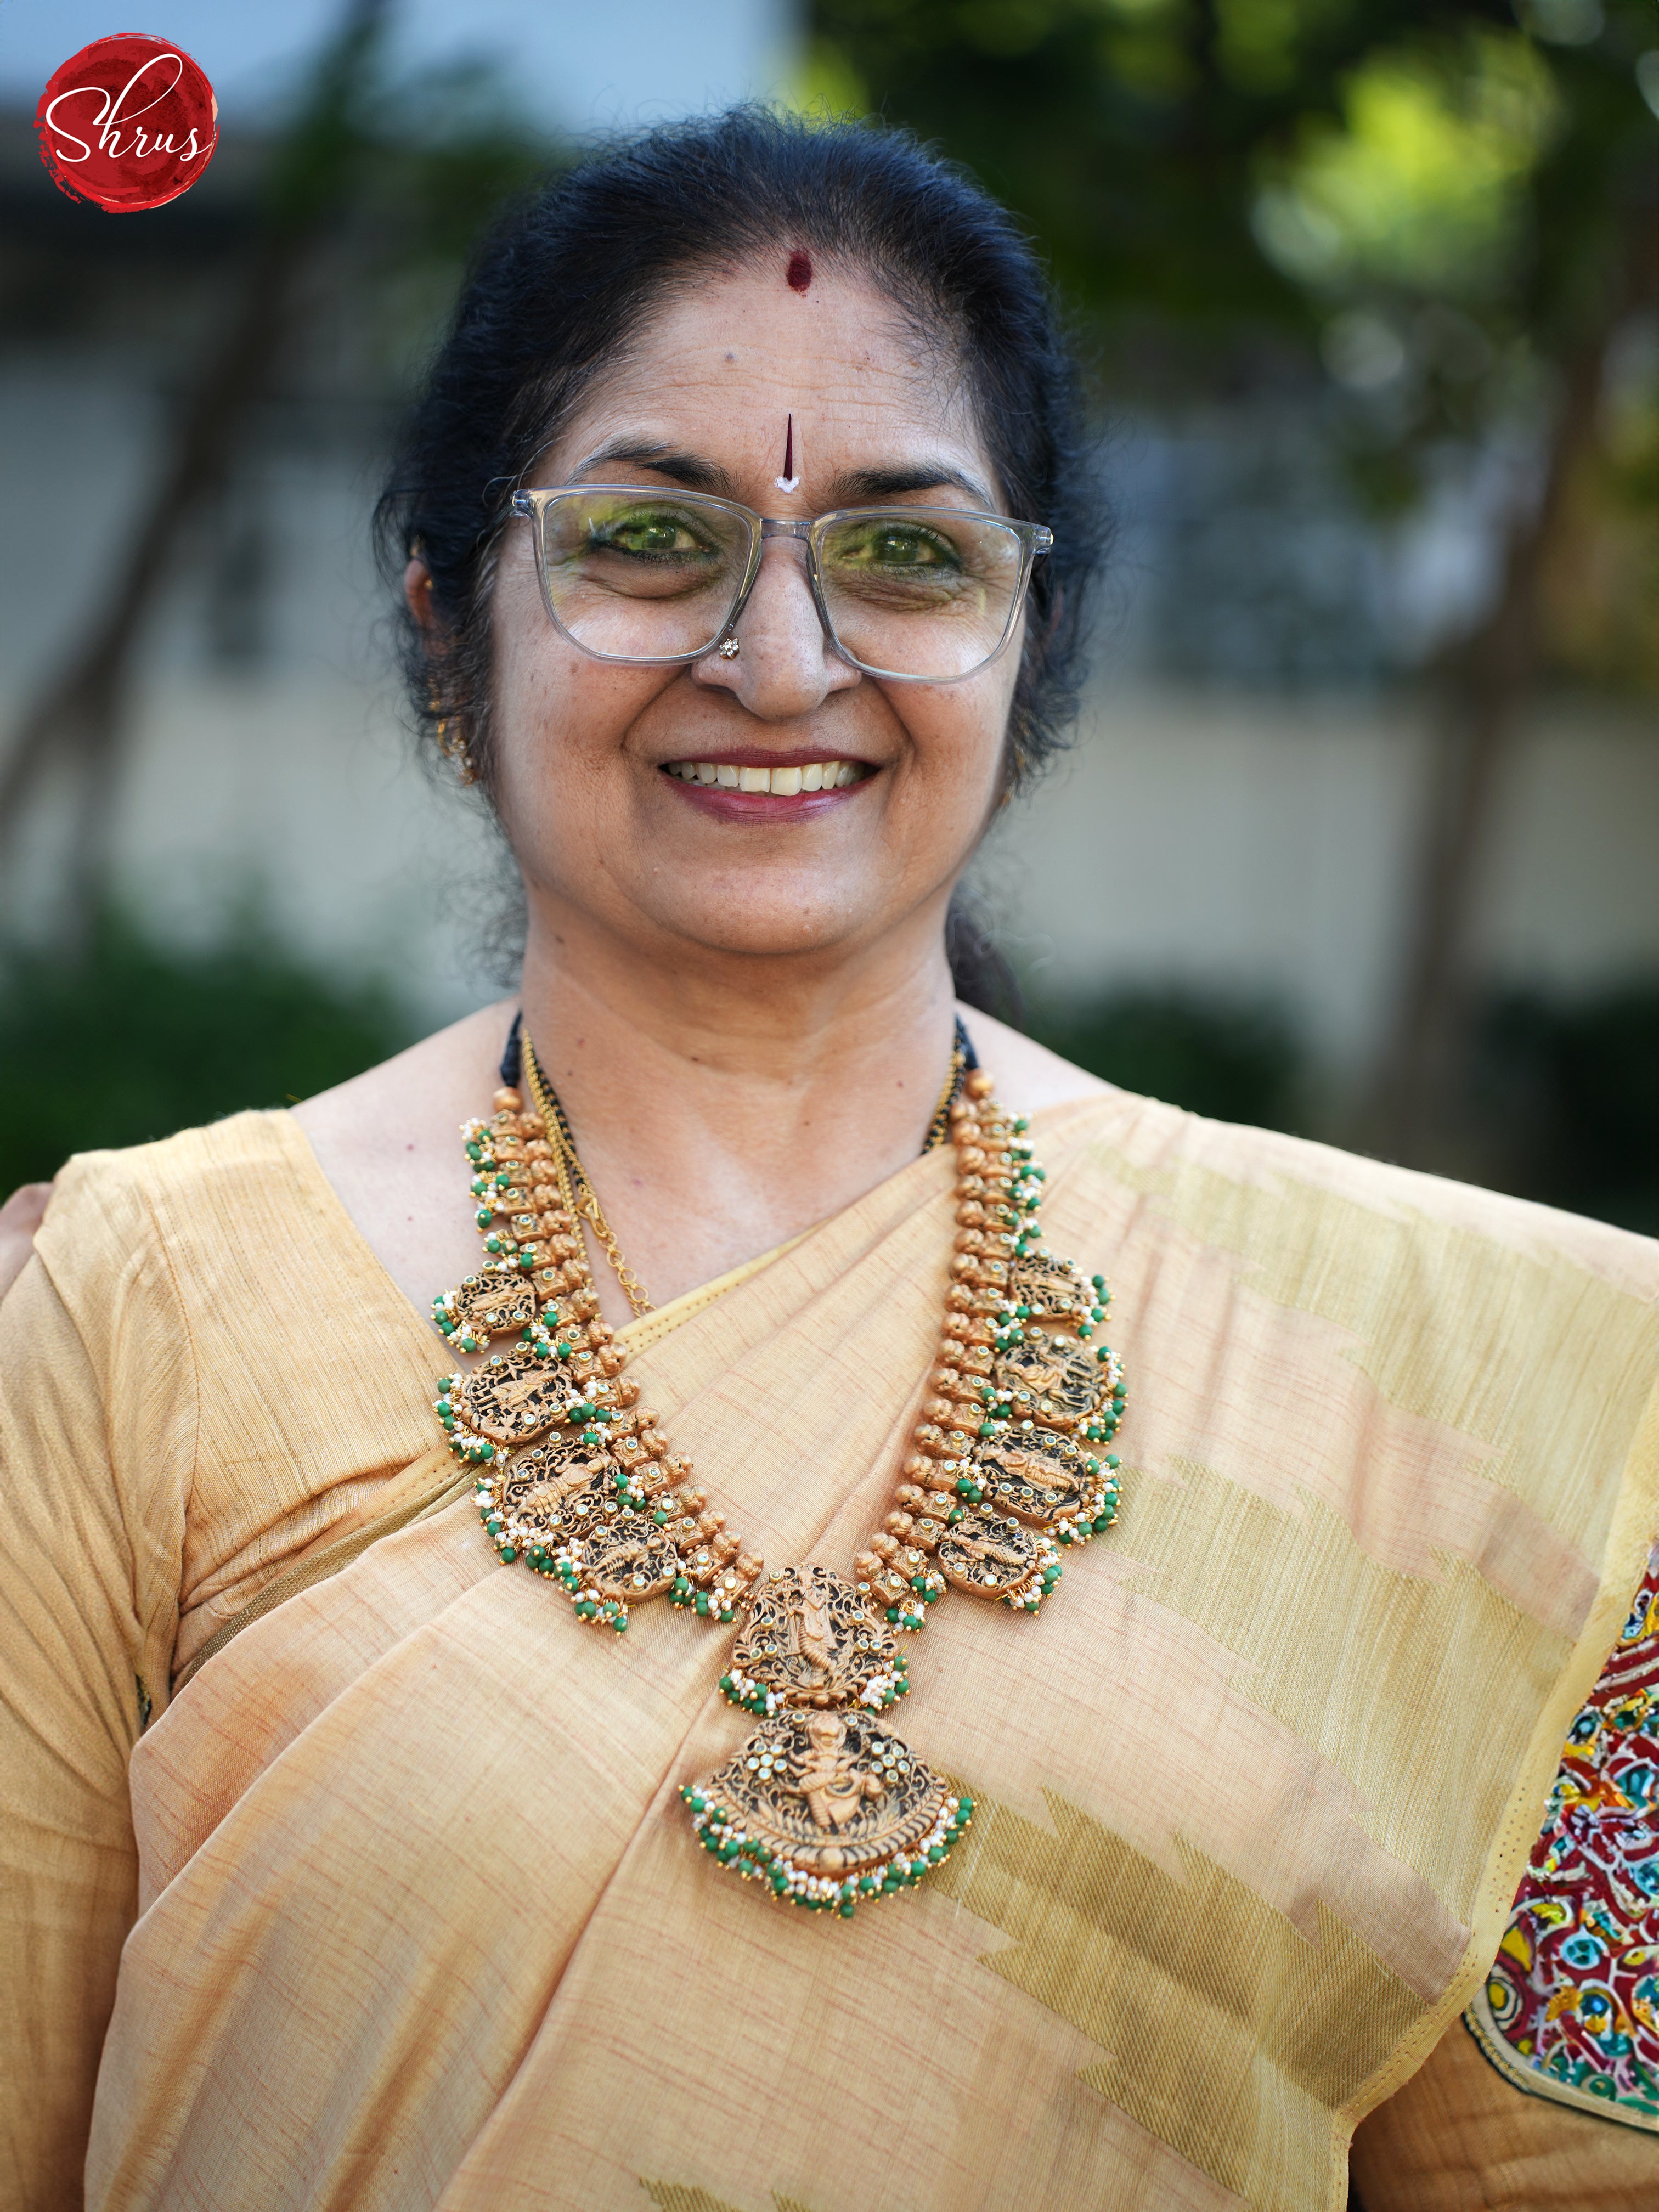 Handcrafted Dasavatharam Terracotta necklace with jhumkas - Accessories - Shop on ShrusEternity.com